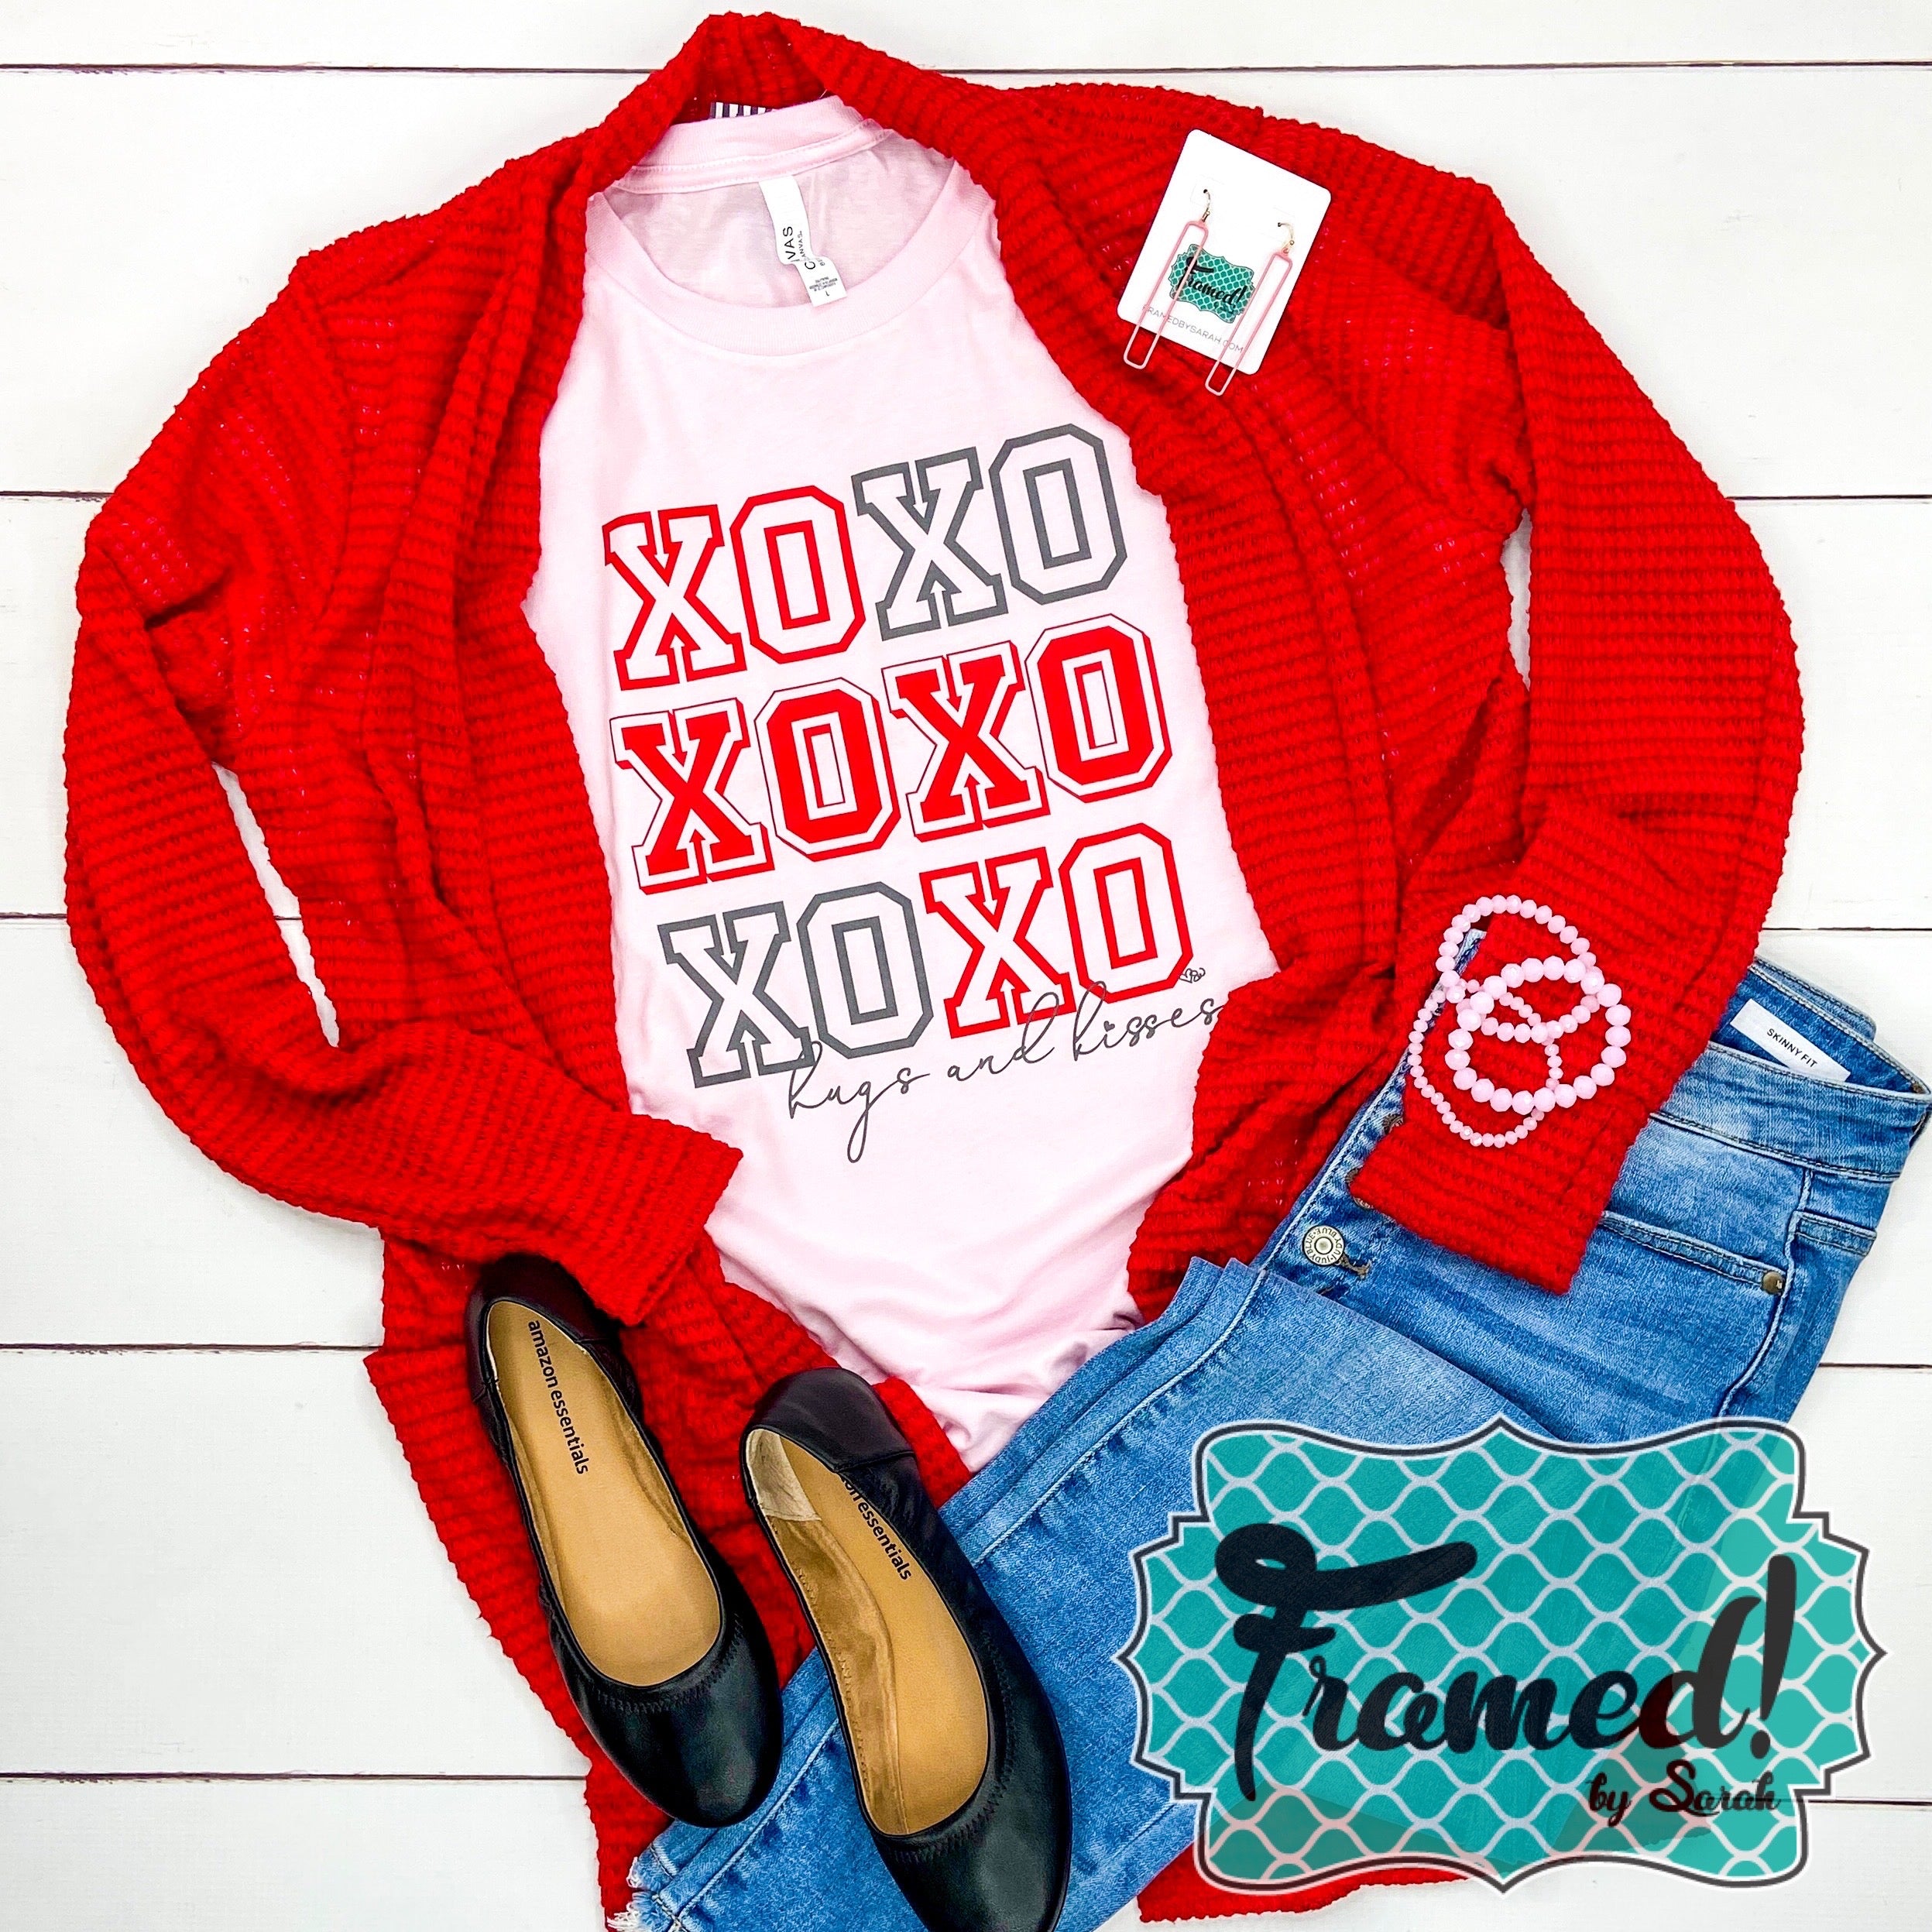 Soft Pink Short Sleeve "XOXO" Valentine Tee (Small Only)